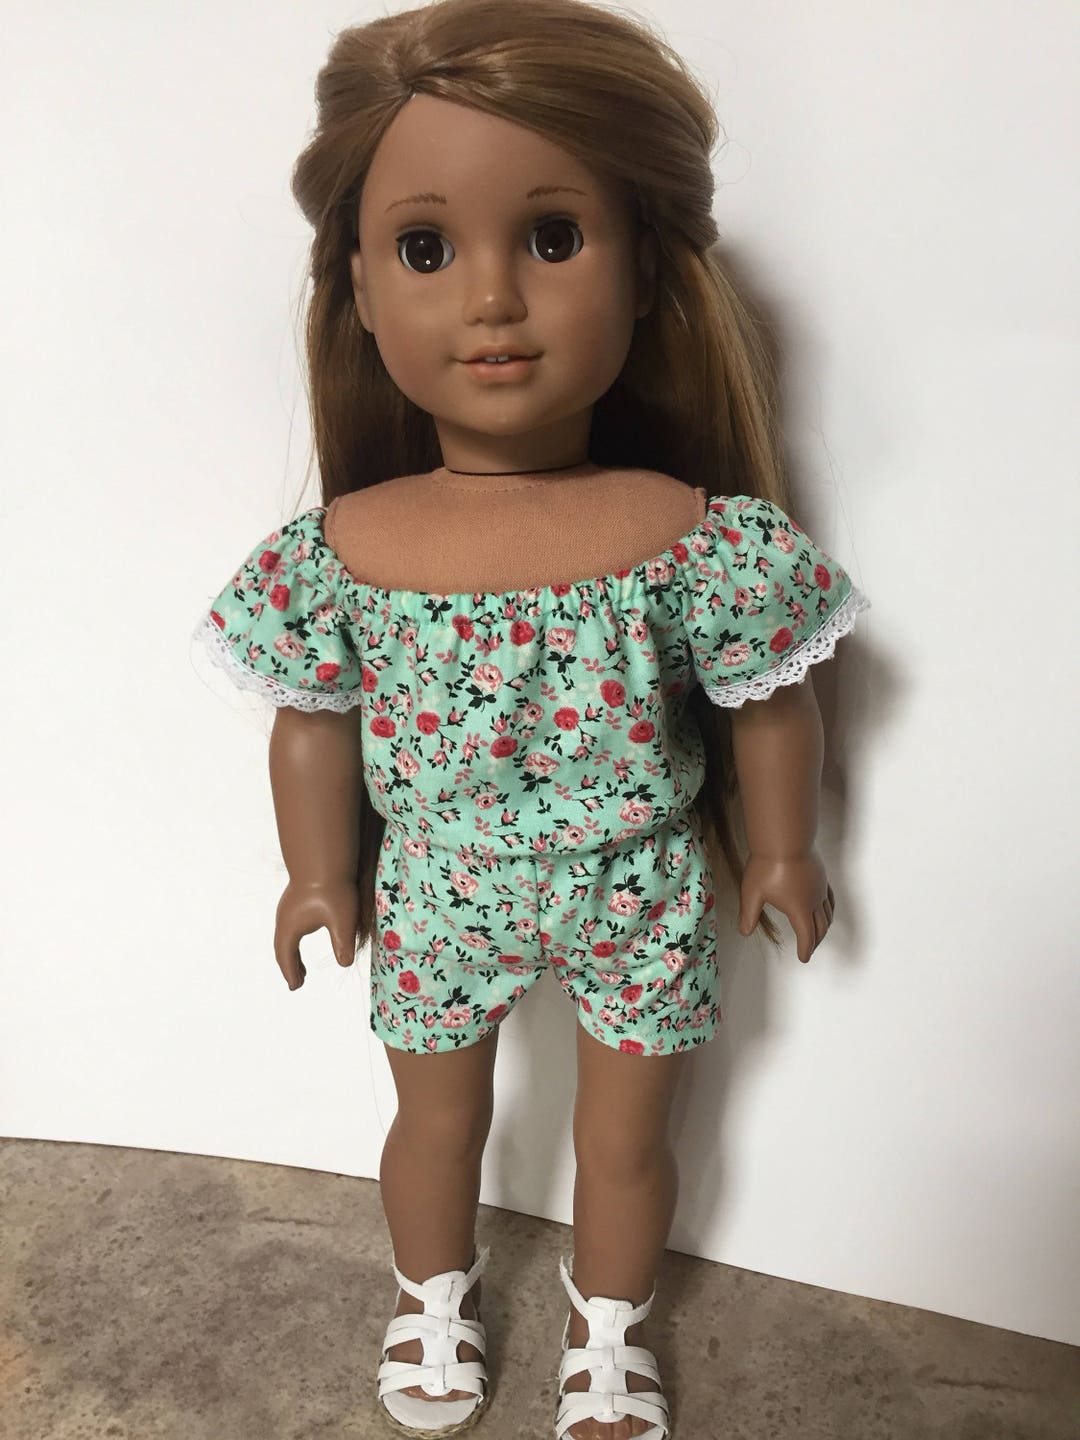 Blue/green Floral Romper Made to Fit 18 Inch Dolls Such as - Etsy